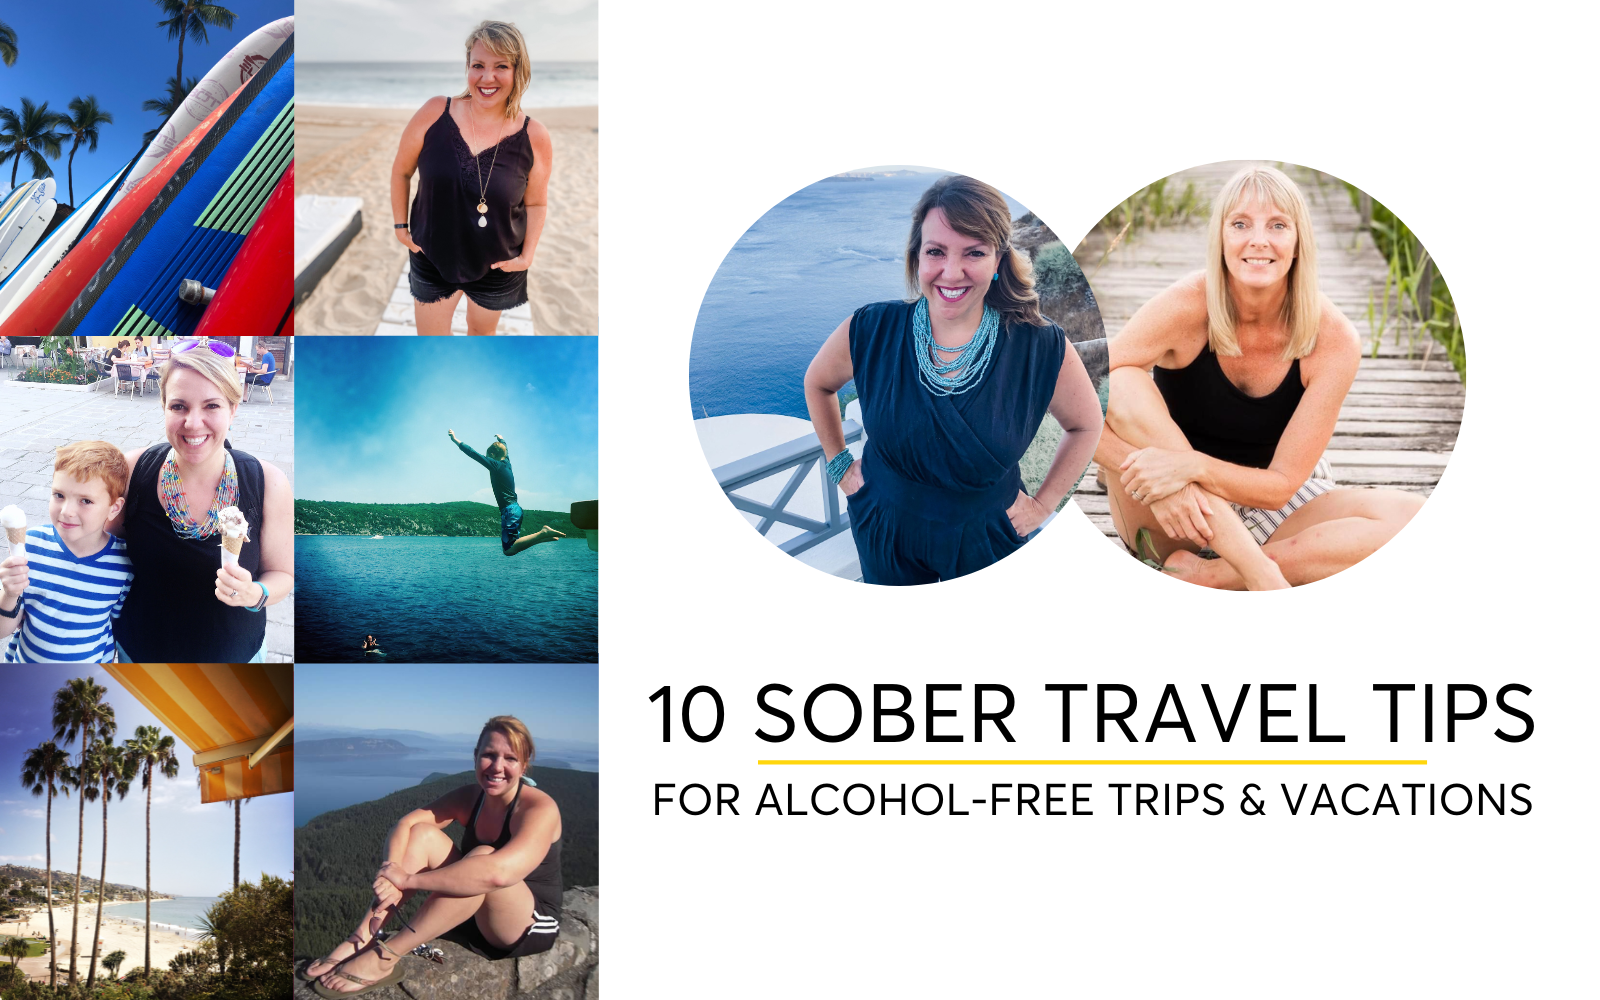 10 Sober Travel Tips You Need For Your Next Alcohol-Free Trip or Vacation